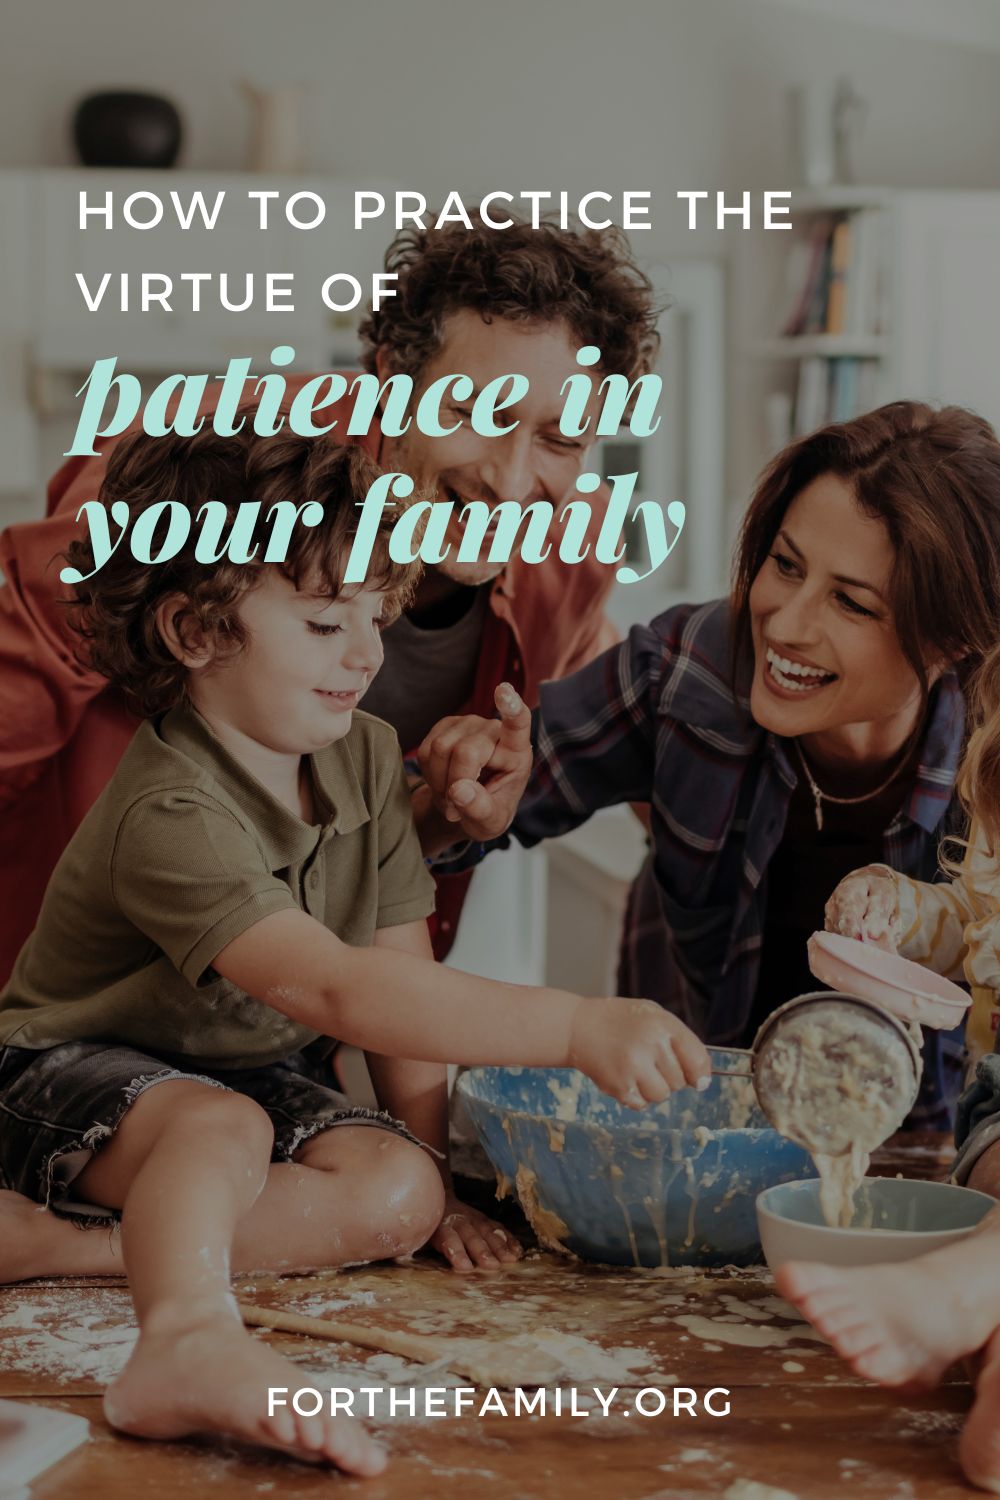 How to Practice the Virtue of Patience in Your Family